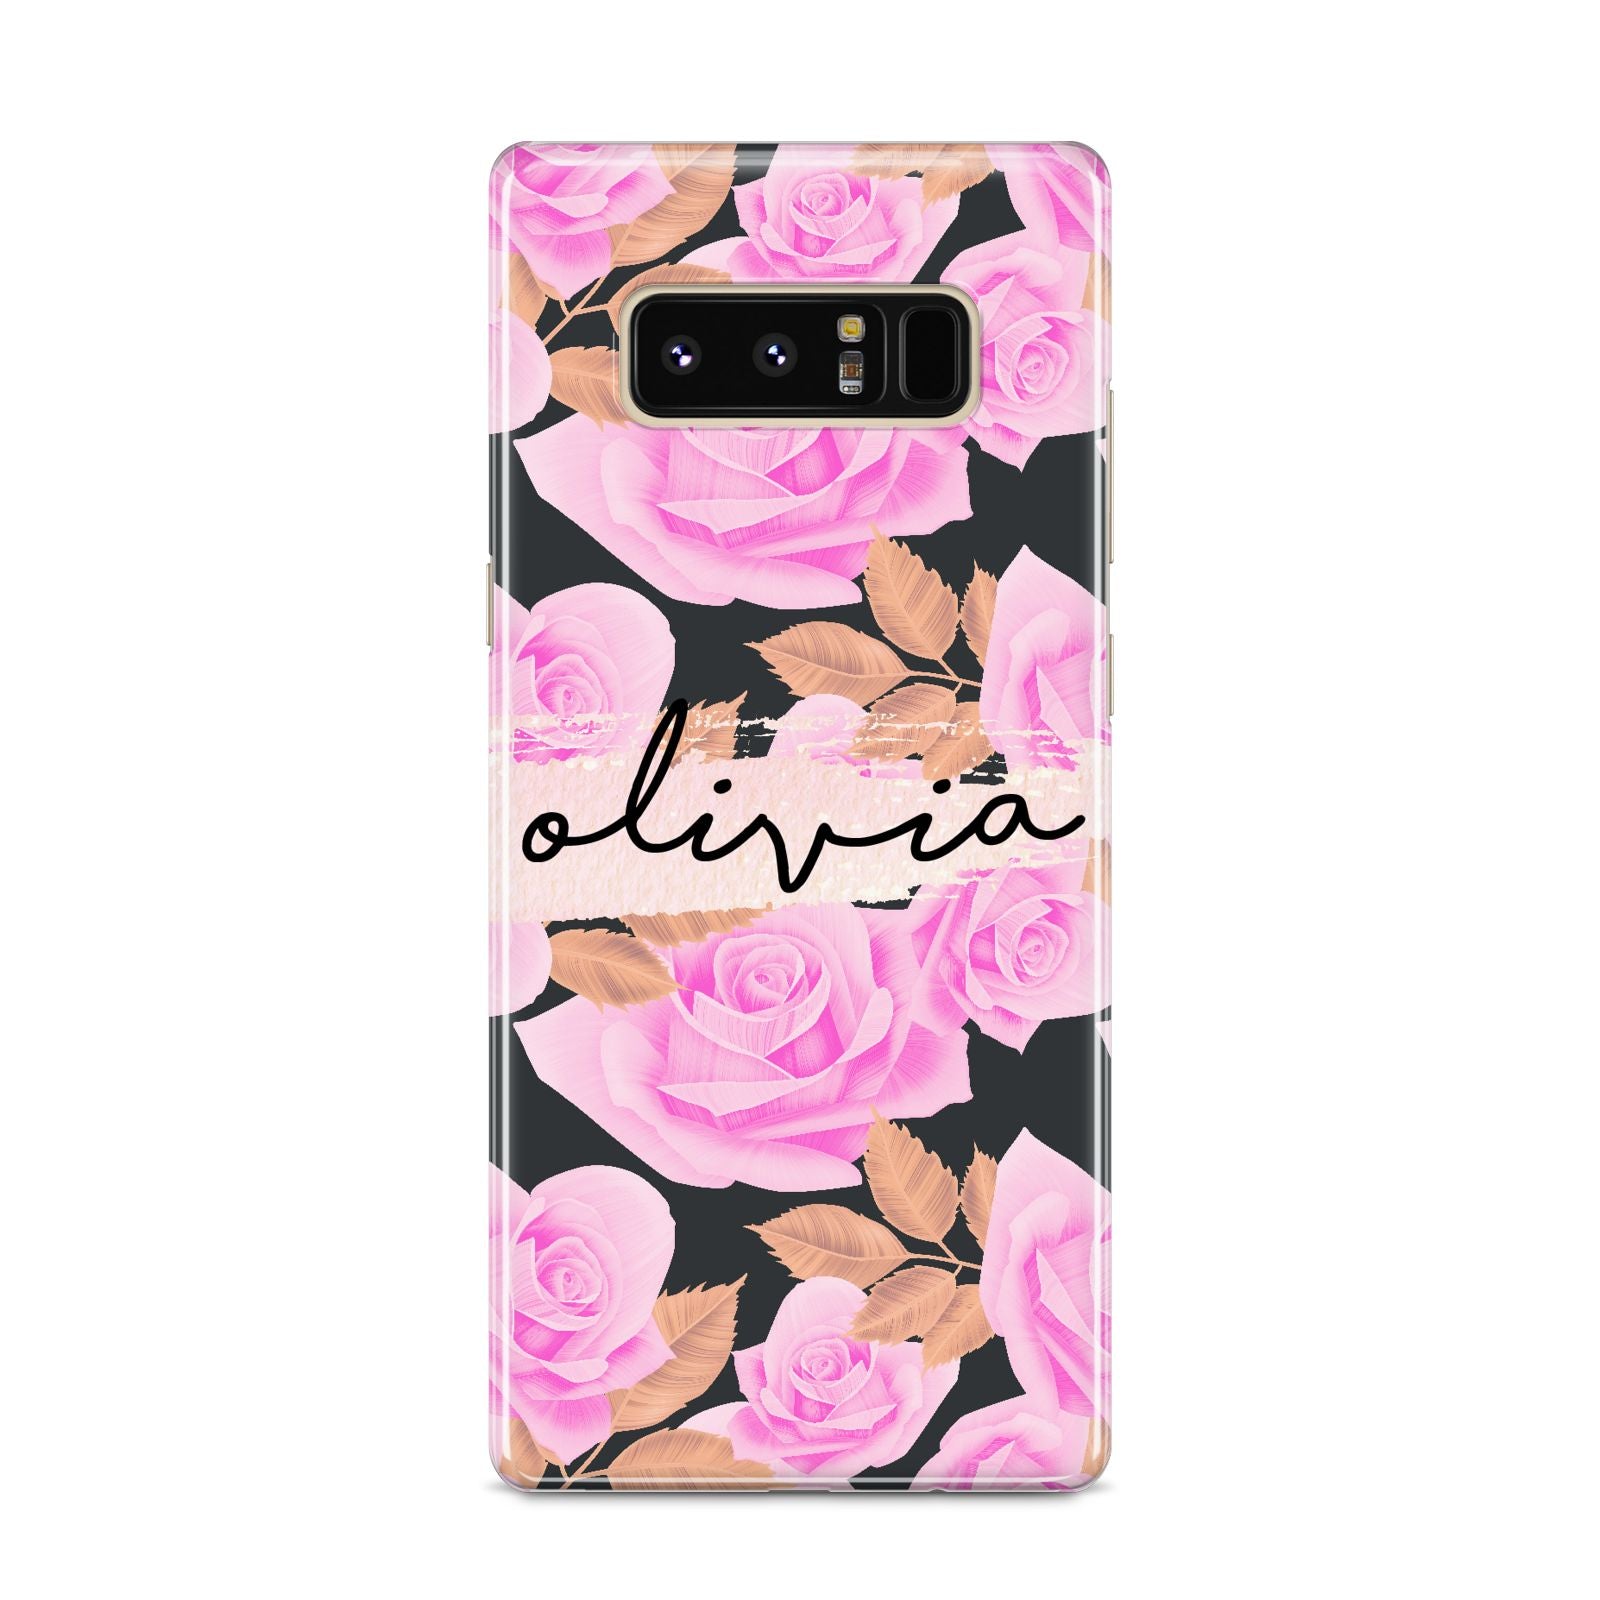 Personalised Floral Pink Roses Samsung Galaxy S8 Case